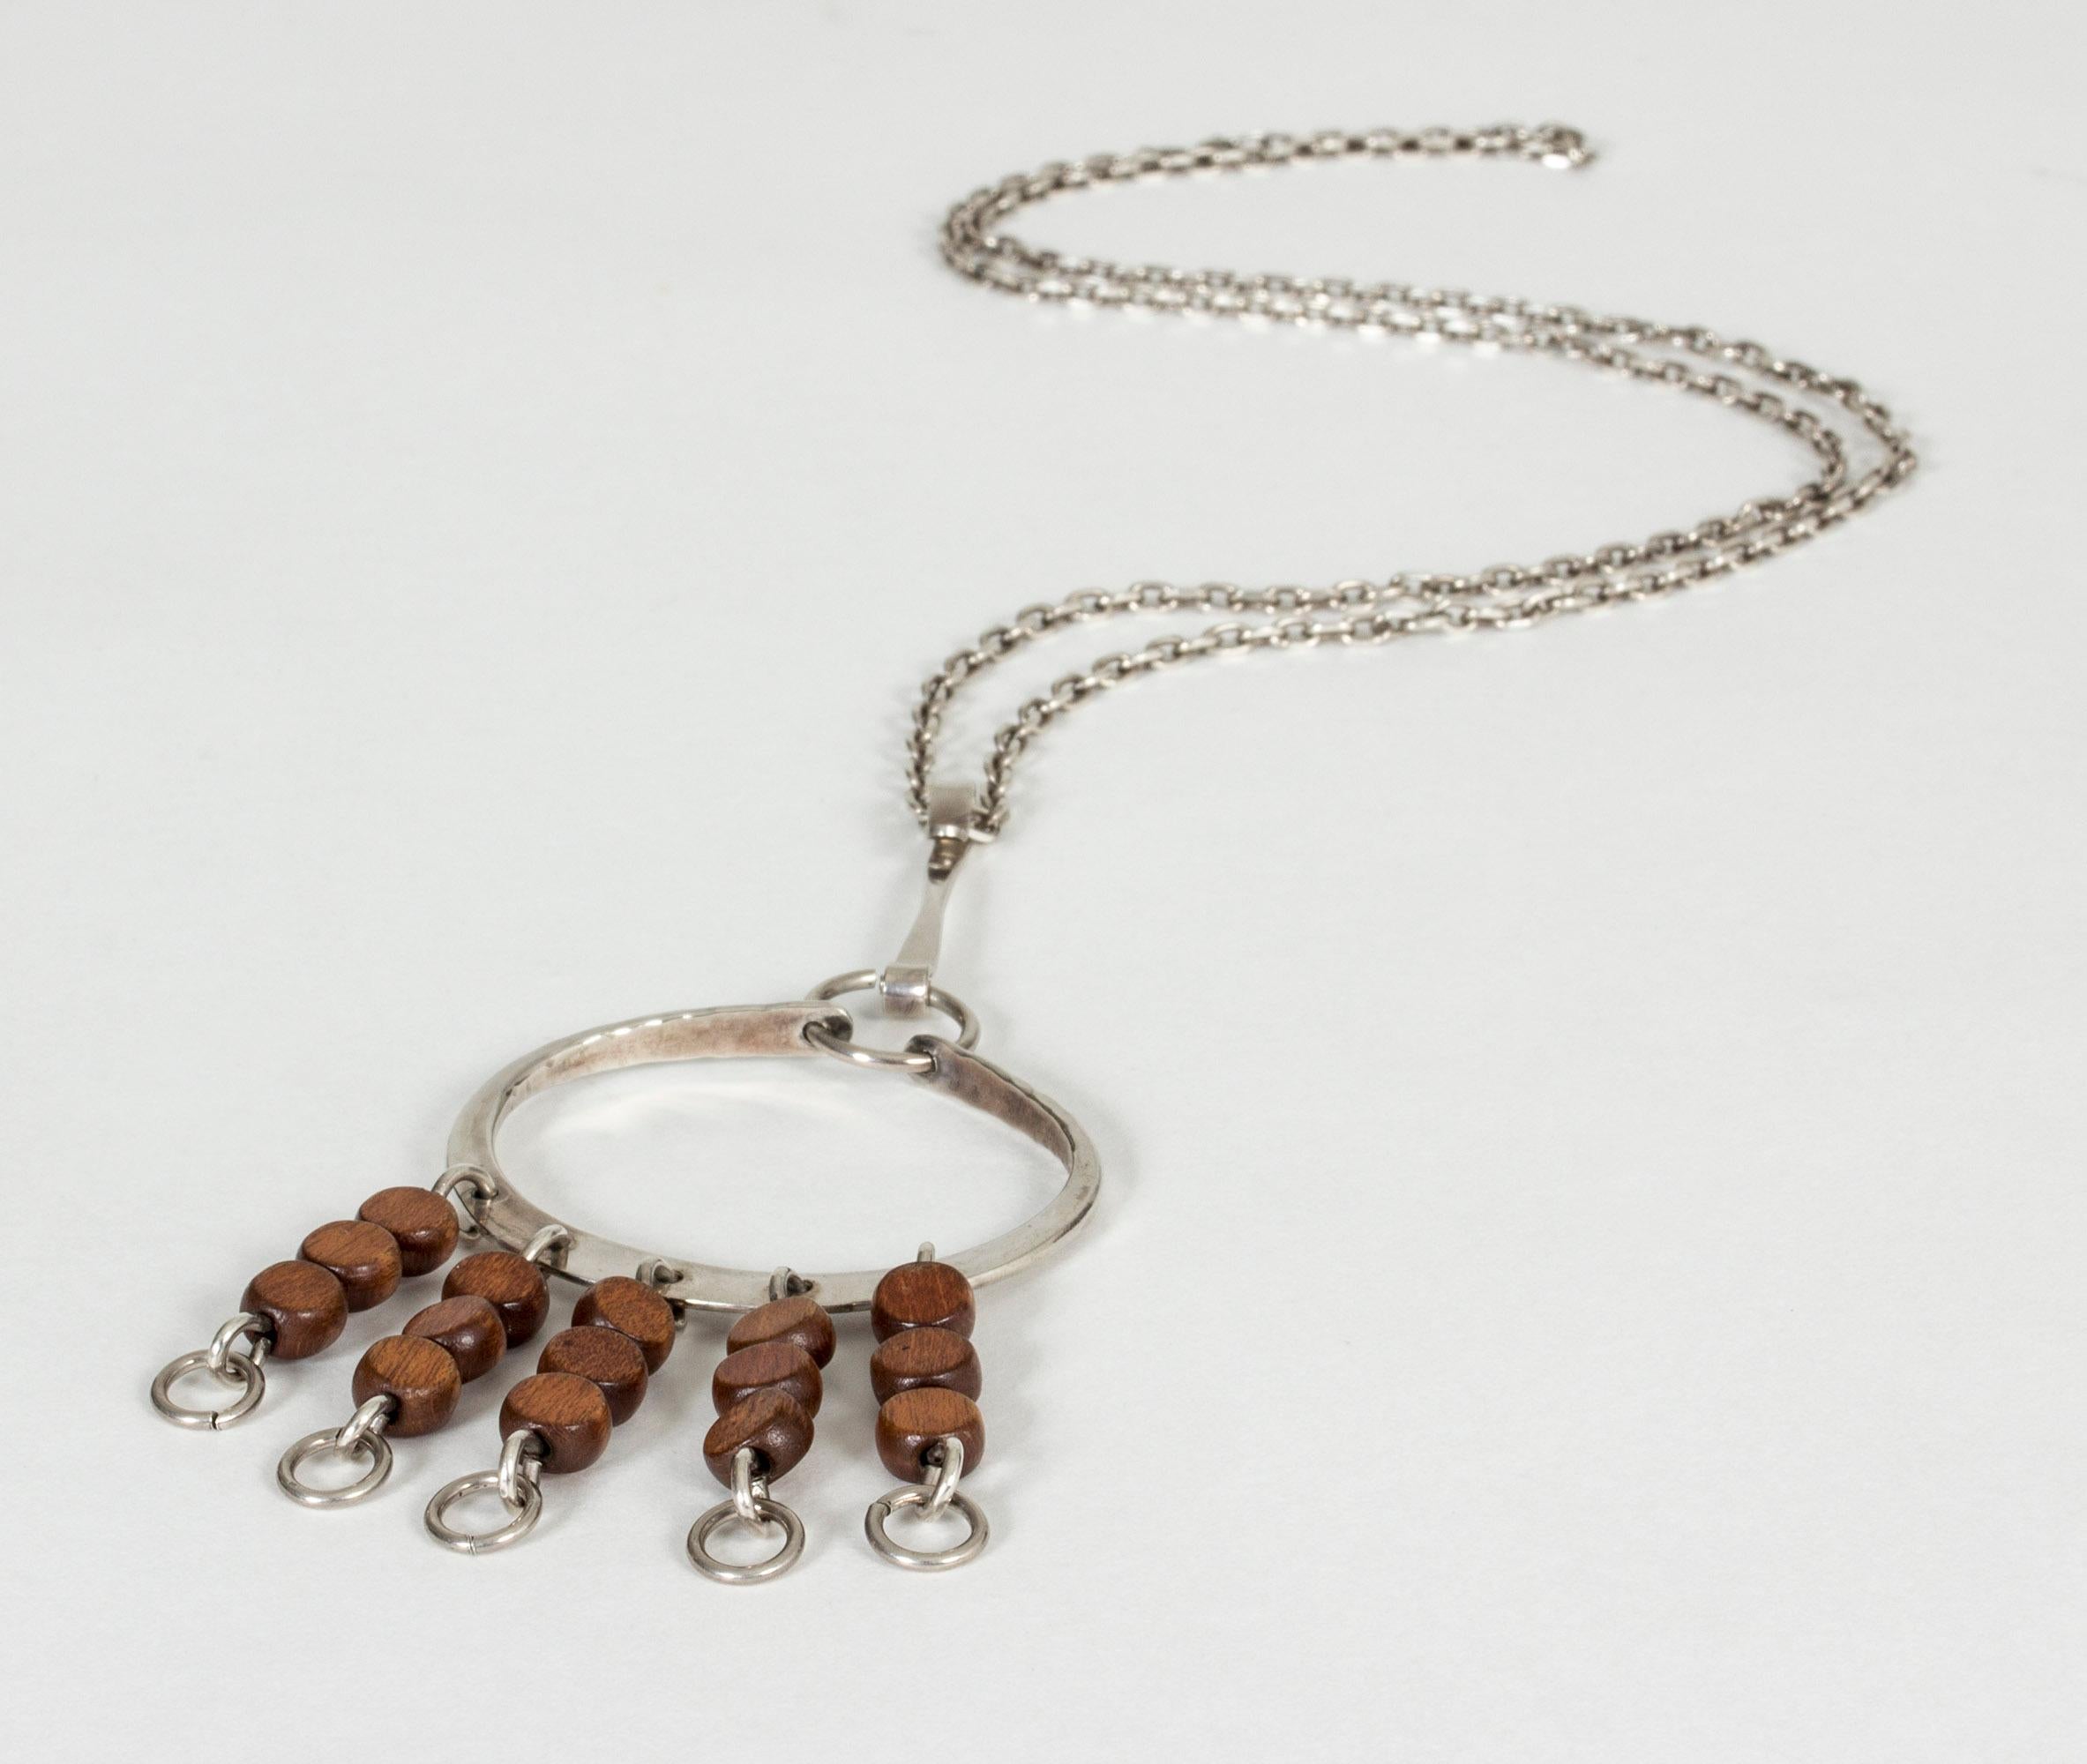 Beautiful silver pendant by Anna Greta Eker, with strands of brown wooden beads hanging loosely on silver chains. The large oval of the pendant has a gentle hand-hammered finish.